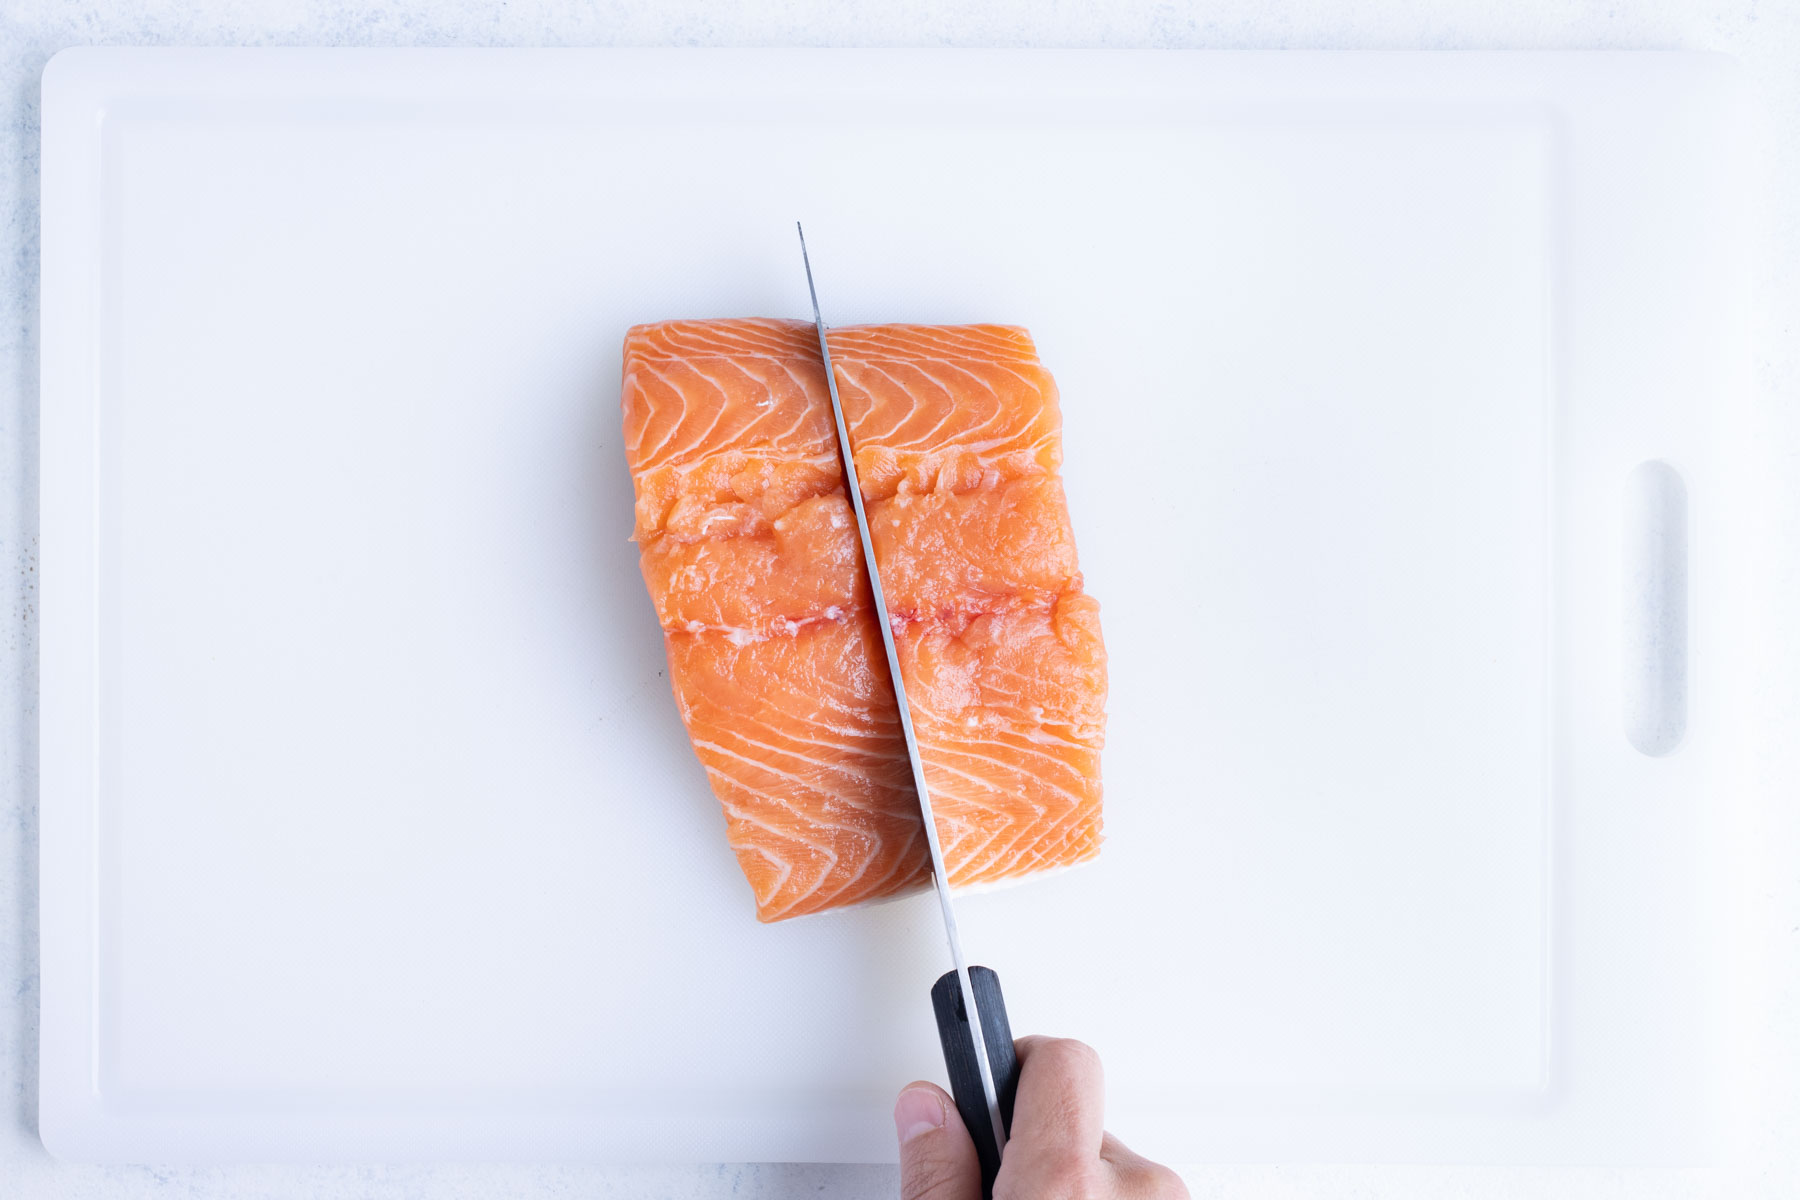 Salmon is cut into thin pieces.